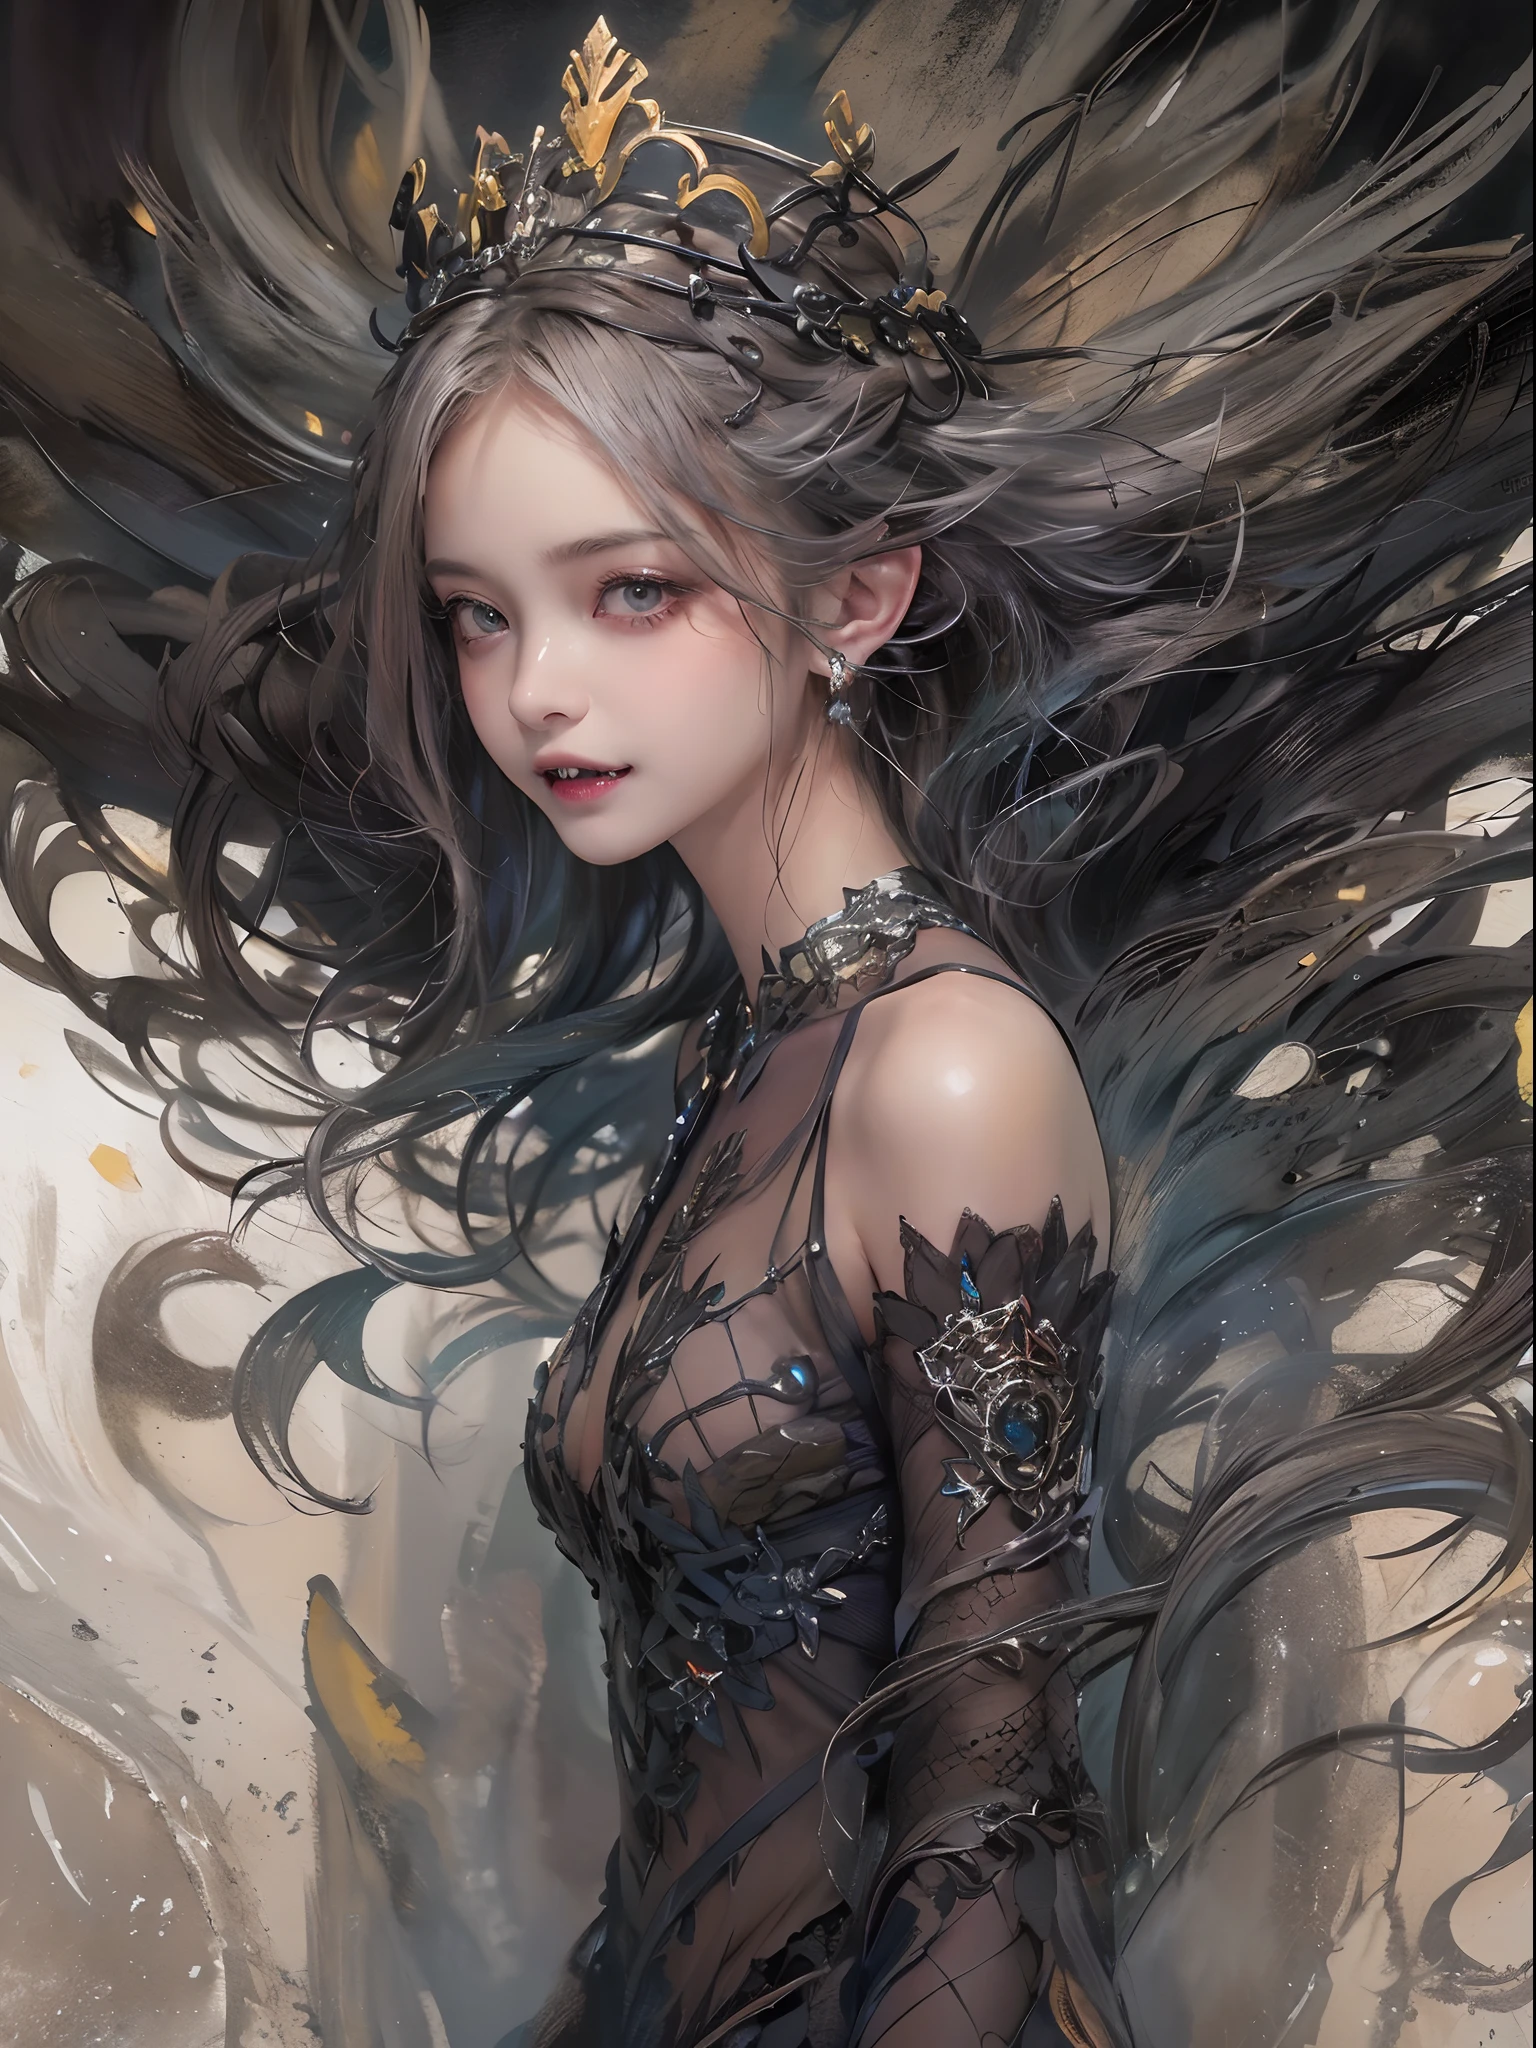 (watercolor:1.2),(incredible detail, textures and maximum detail),(dark color concept:2.0), dolly girl, a girl like doll with angel wings, archangel, angel ring, elf ear with many earings, facing the front, nearly naked, thin body, skinny, small breasts, tiny , princess crown, dragon horn, looking up at camera, (no hands),(Highest quality authentic textured skin),(Faint sunshine),(catch light:1.5),(abyssal),(Fine, Round, Symmetrical eyes),Delicate facial features,(Burning bright and cold eyes), very slim and thin body, naked, nude, (She has a sadly smile on her face),(Her face is gentle and beautiful),Glass earrings on the ears,,(Blonde hair),(silvery white hair),(Dramatic photo:1.4),(dramatic pose),(flamboyant photo), upturned eyes, upward glance, A messy painting，(Hair flows in air:2.0),(Vortices and tidal currents in the background),(Dramaticlight),(Magnificent scene),(Surrounded by beautiful feathers),Epic realism,Cinematic feeling,(high-density imaging review:1.5),Ultra detailed,Dramaticlight,(intricately details:1.1), complex background, sparkle background, fractal background,(mighty fangs:1.5),naked,nude,